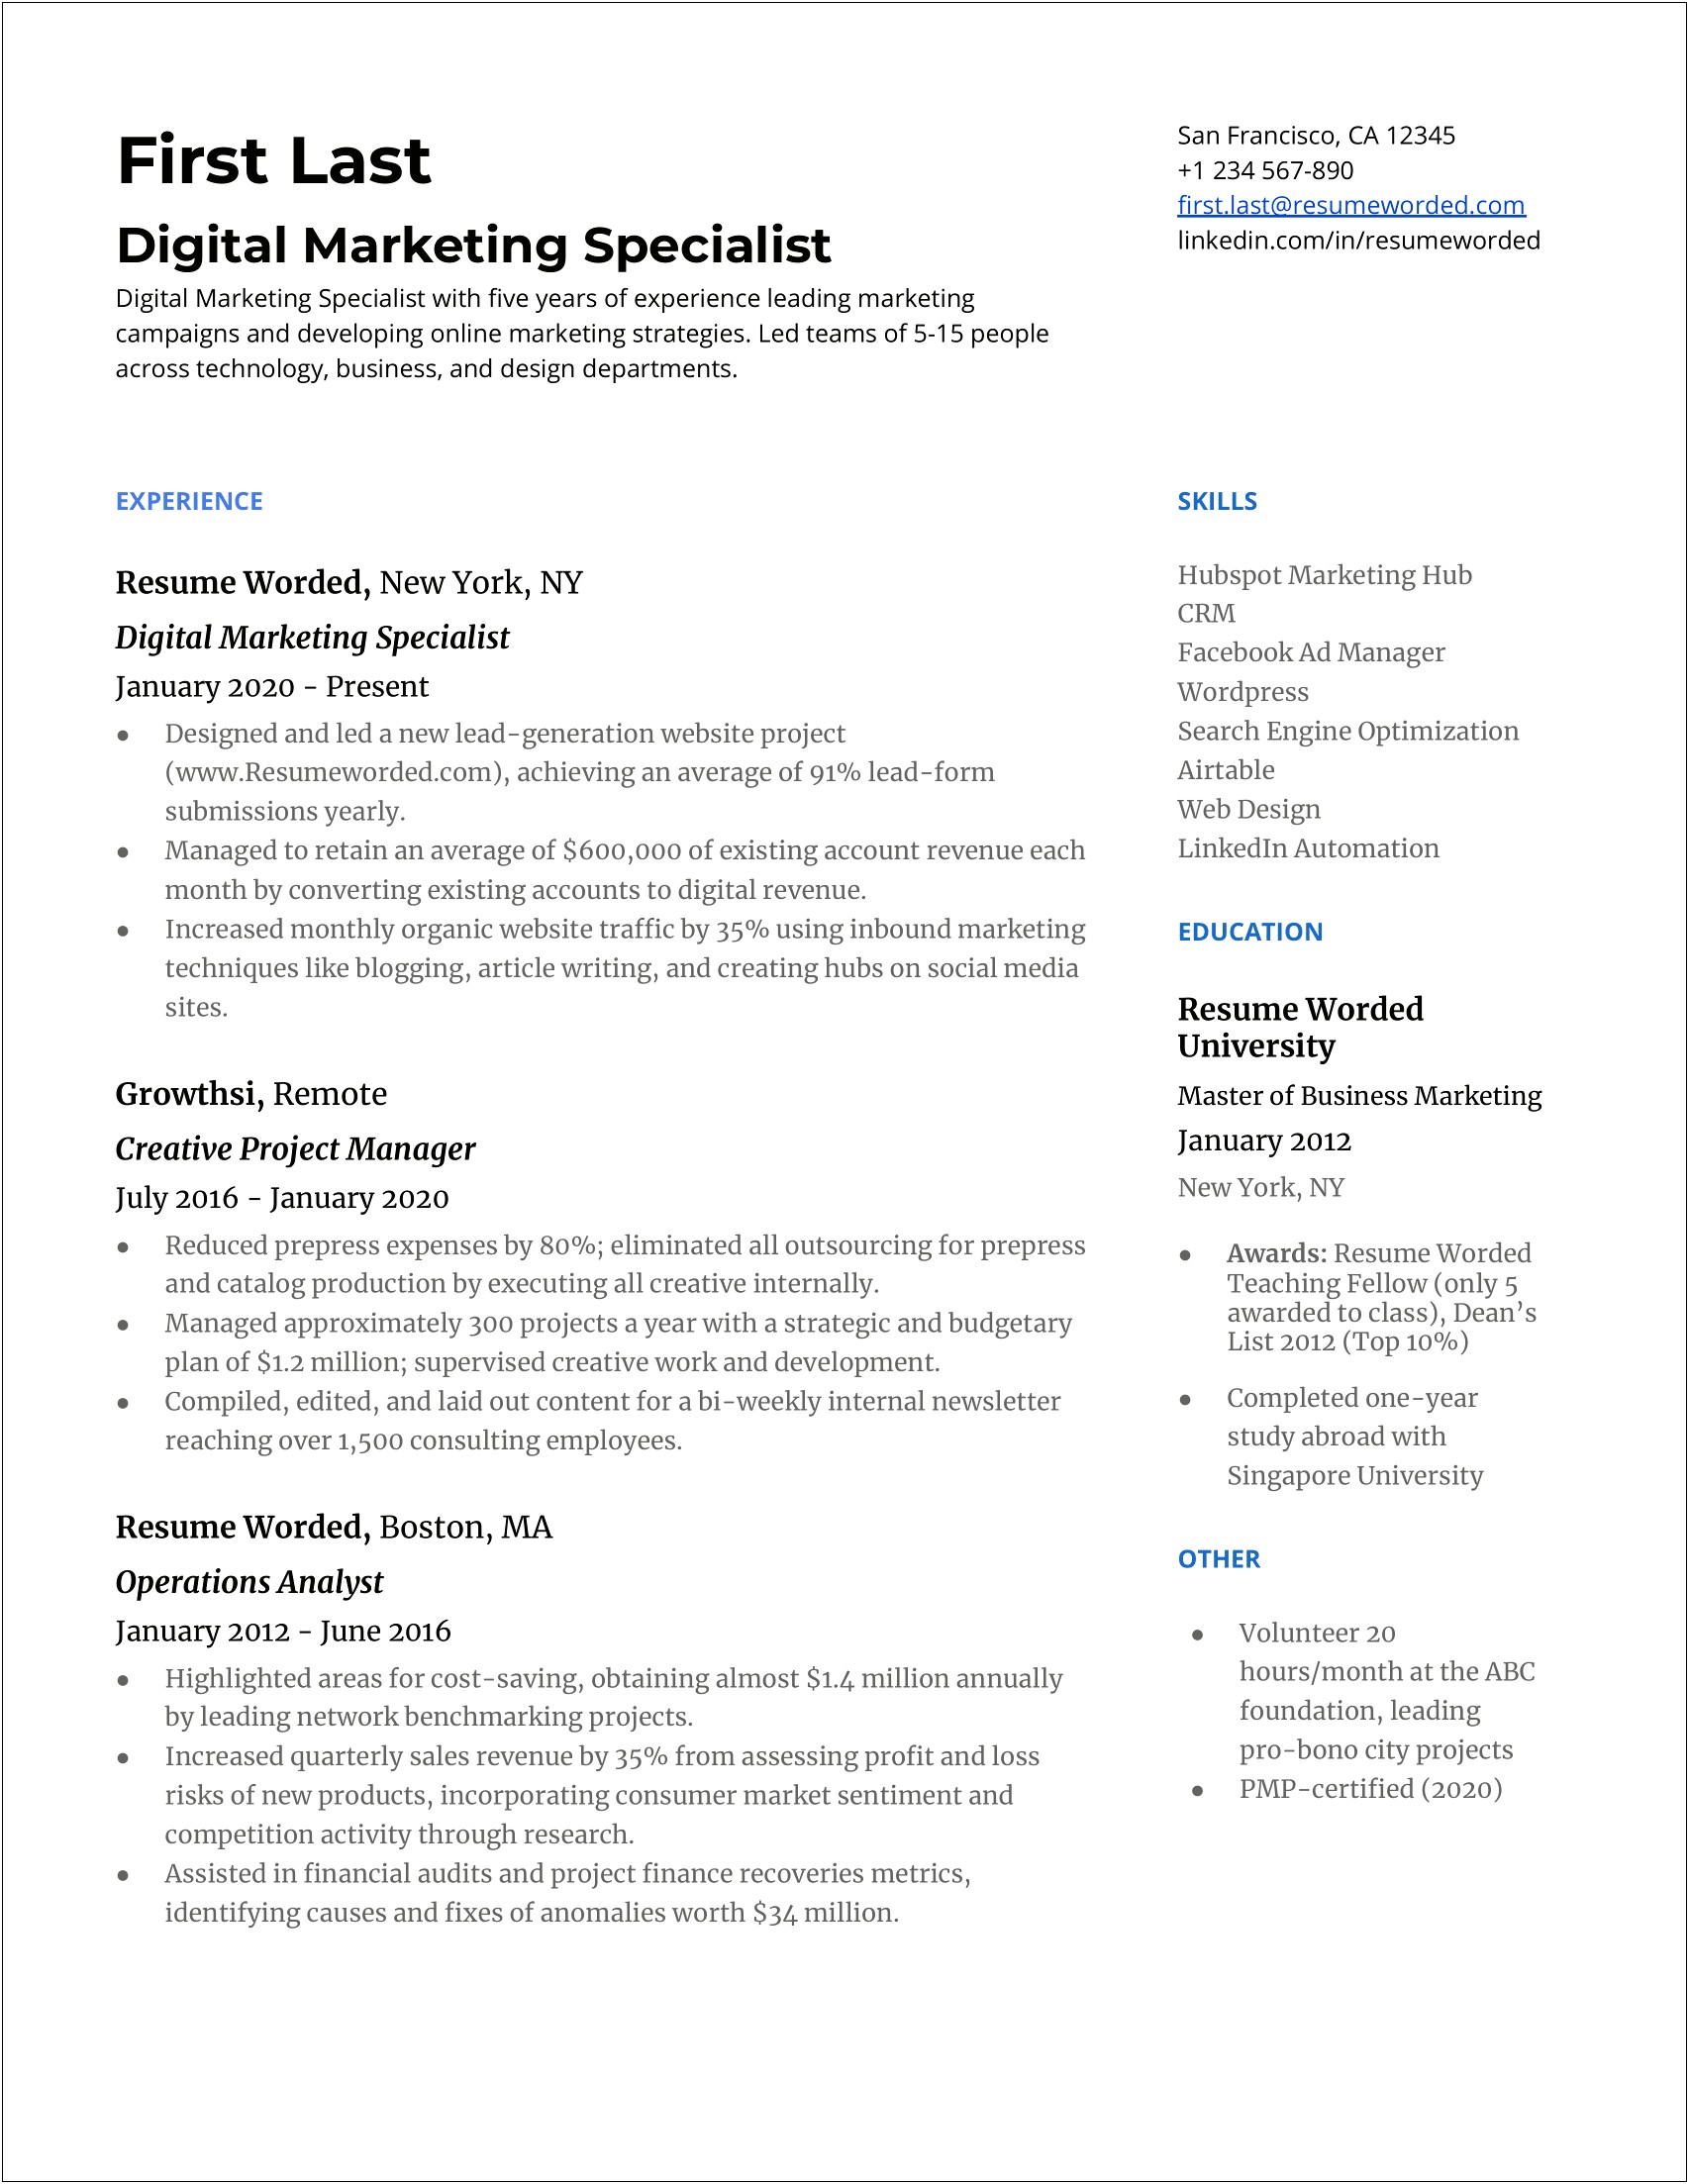 Skills To List On A Resume For Marketing